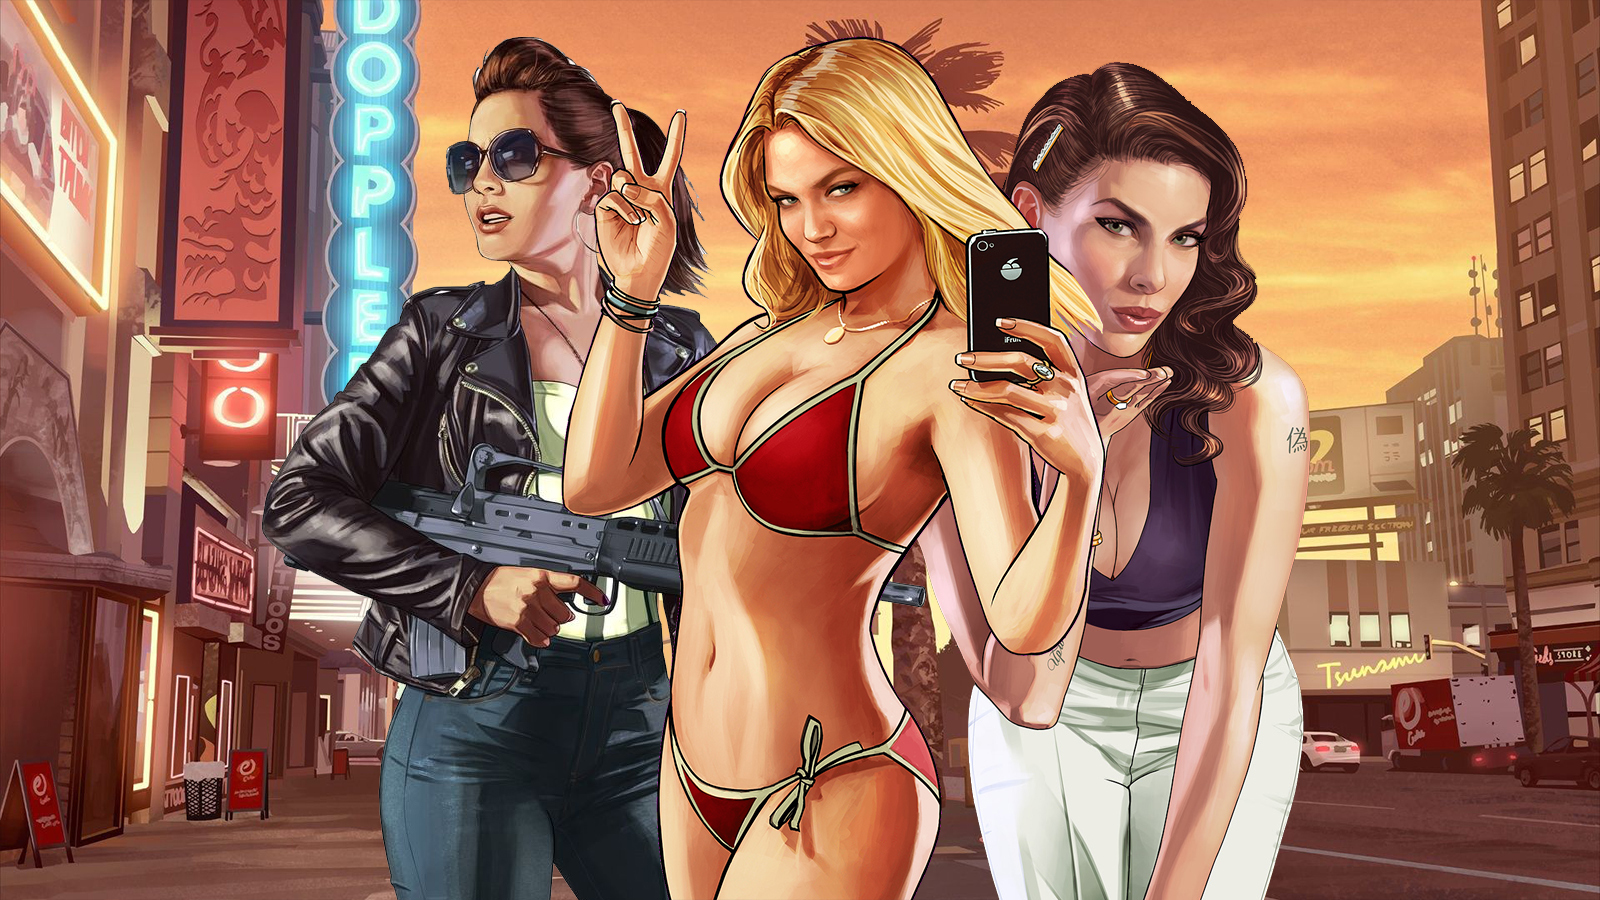 Grand Theft Auto 6 to Star Latina Protagonist, Report Says - CNET